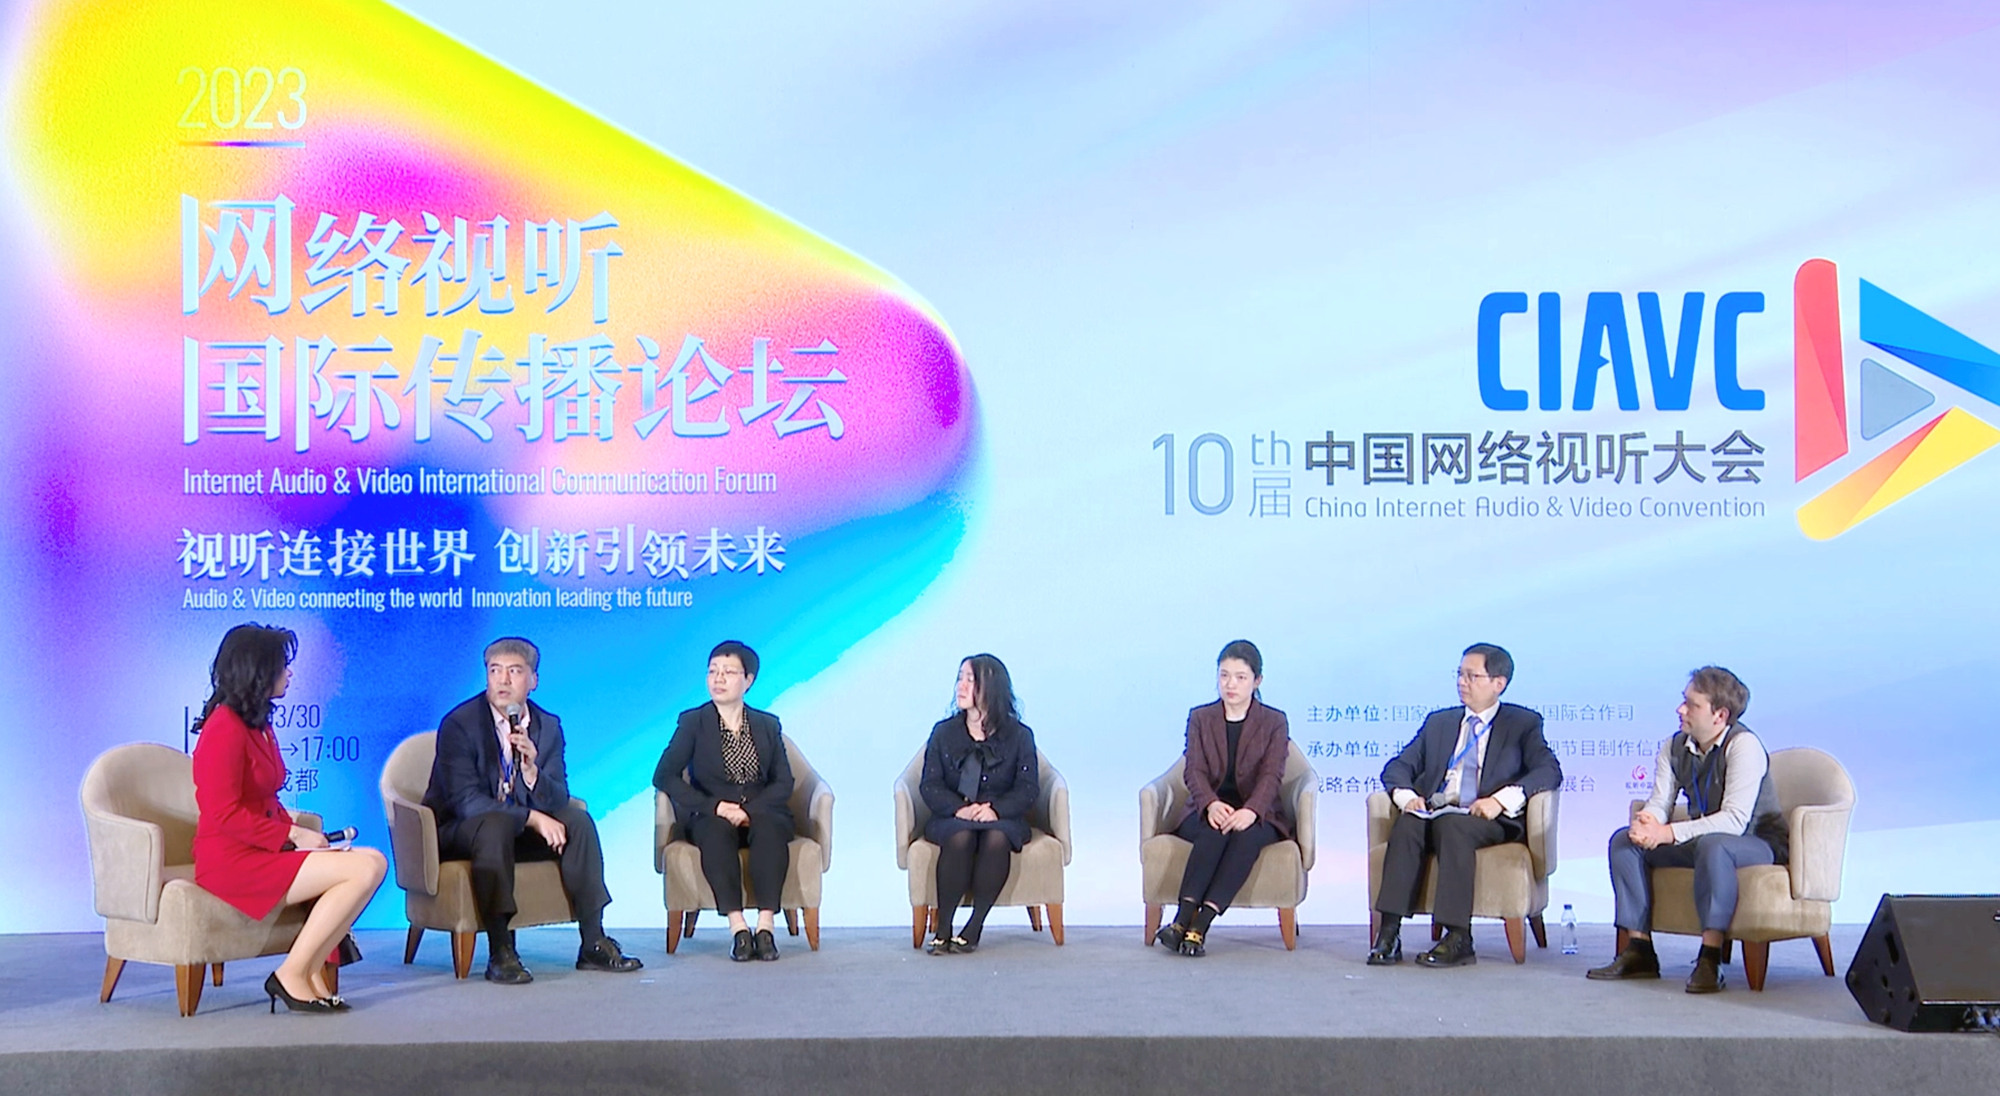 China Television Corporation CEO Liang Dawei (2nd left), discusses changing trends in online content at the forum. /CGTN